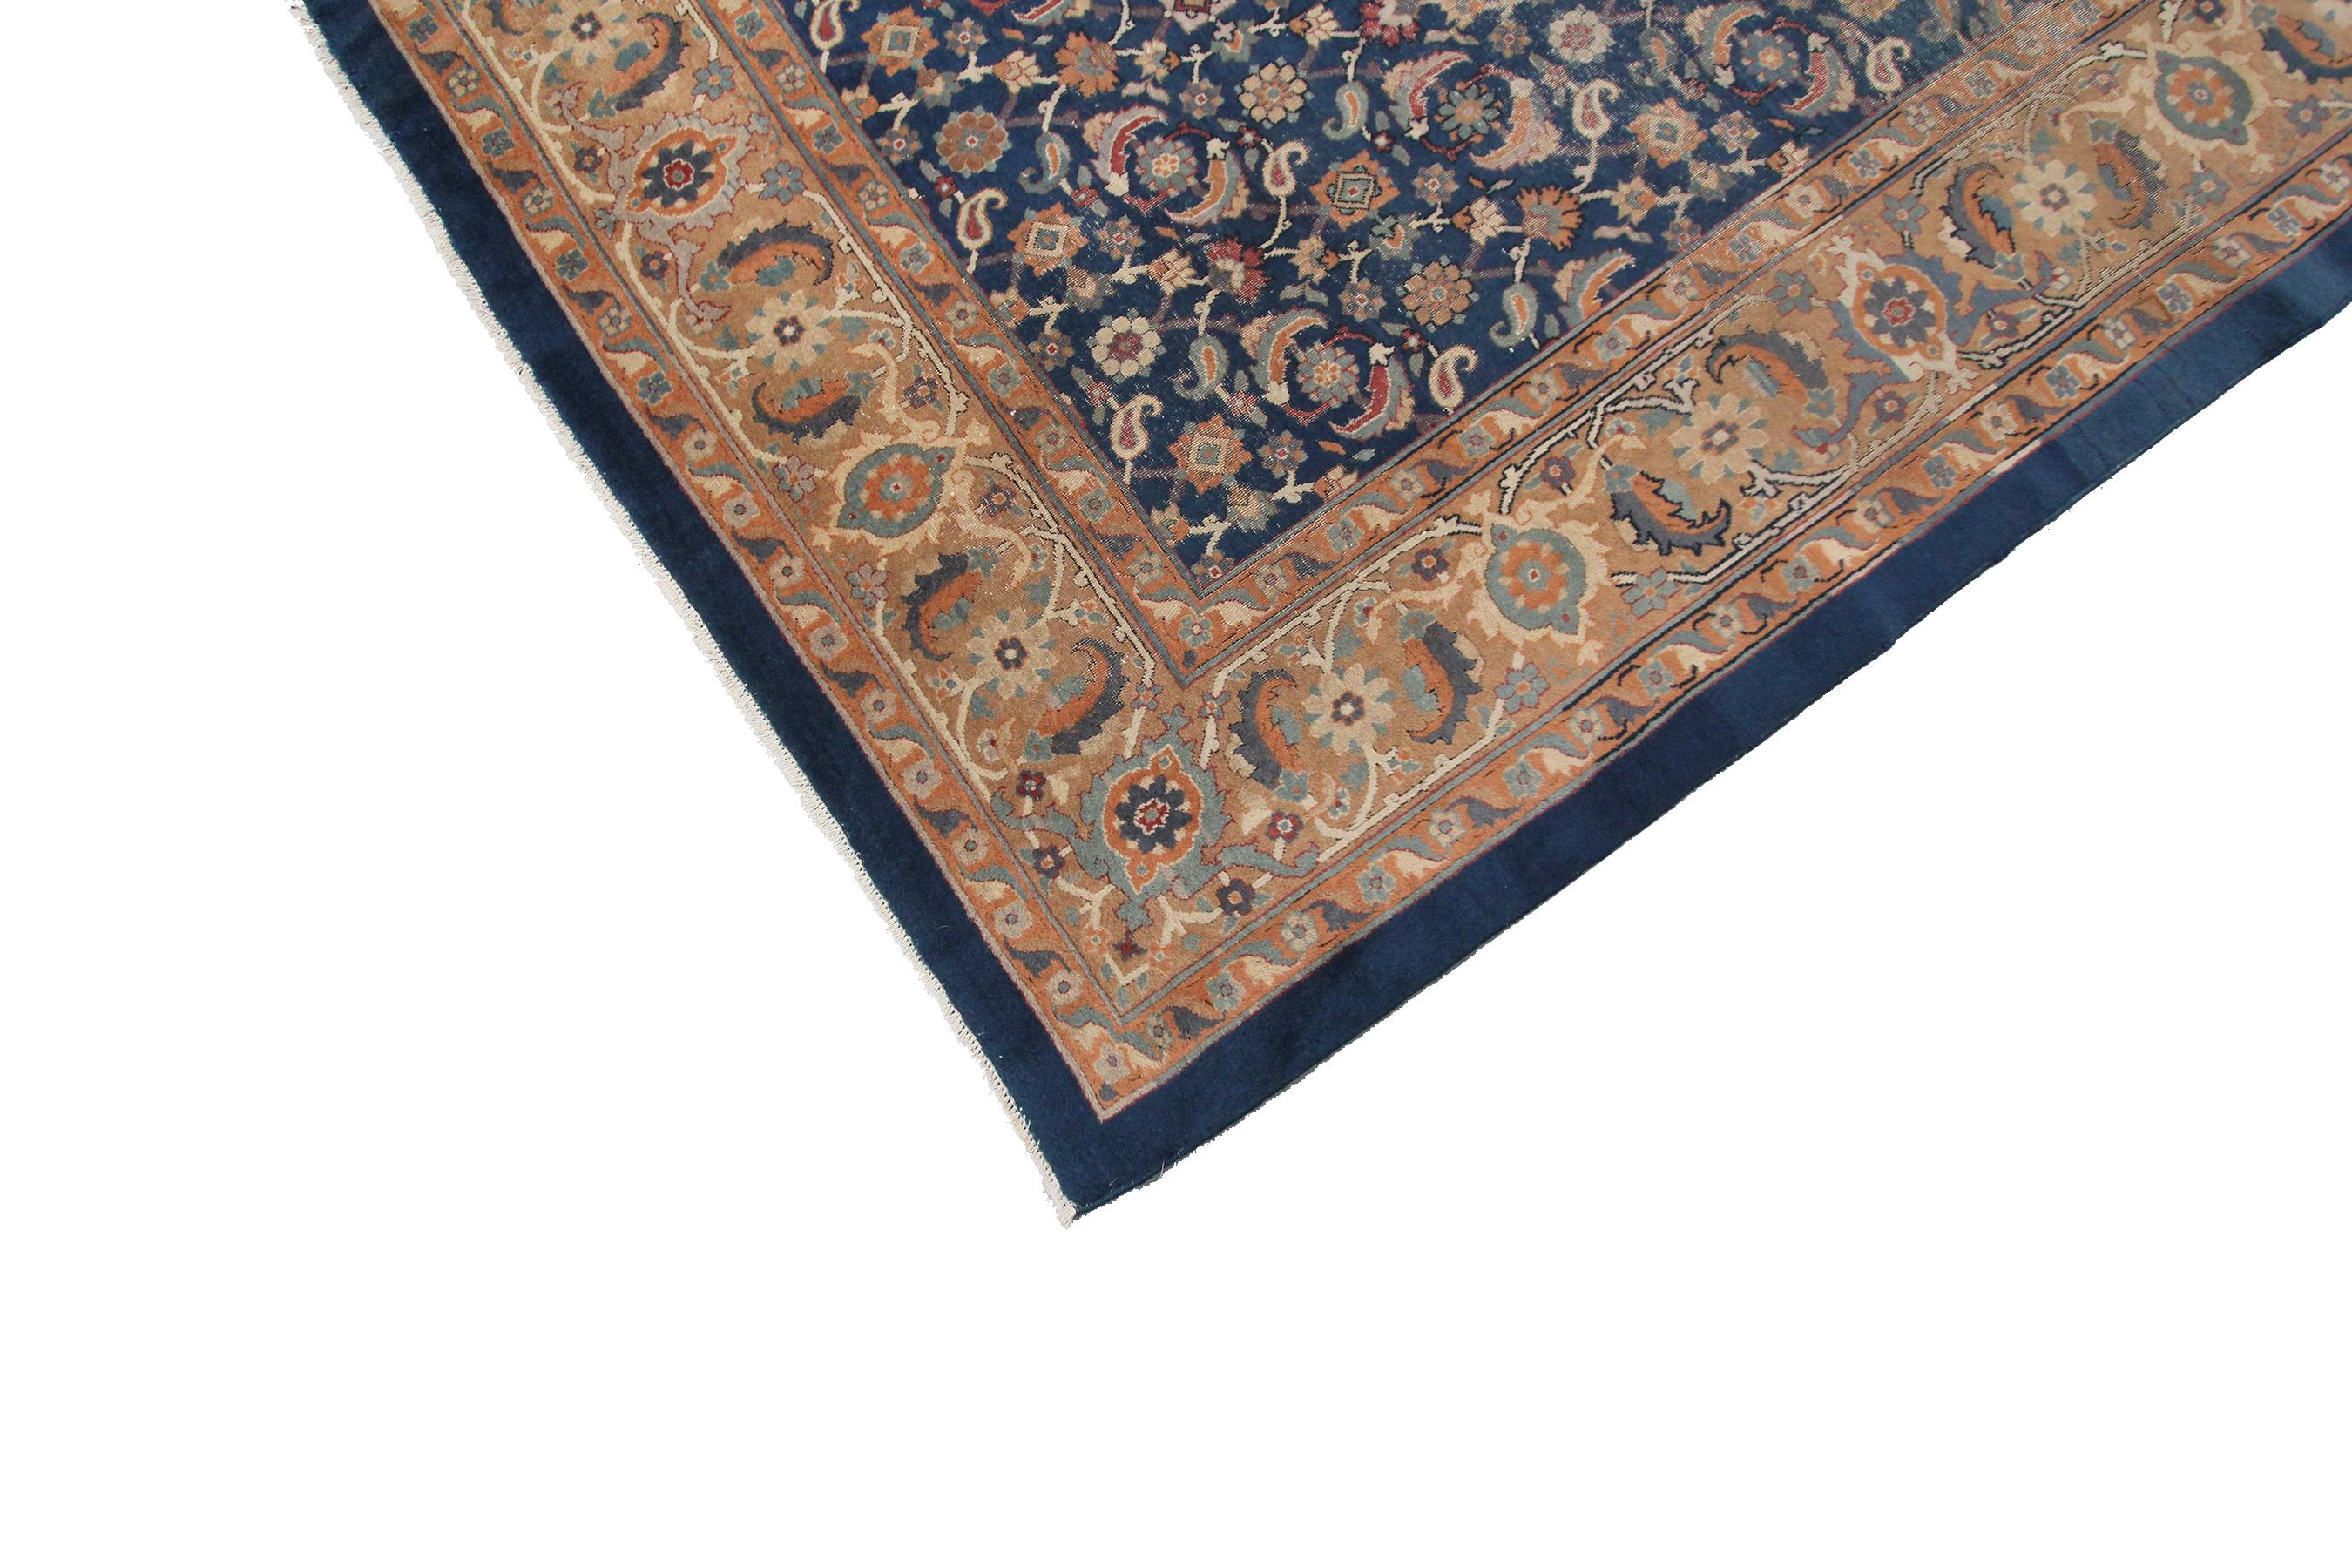 1890 Antique Agra Rug Antique Agra Amritsar Handmade Agra Rug Geometric In Good Condition For Sale In New York, NY